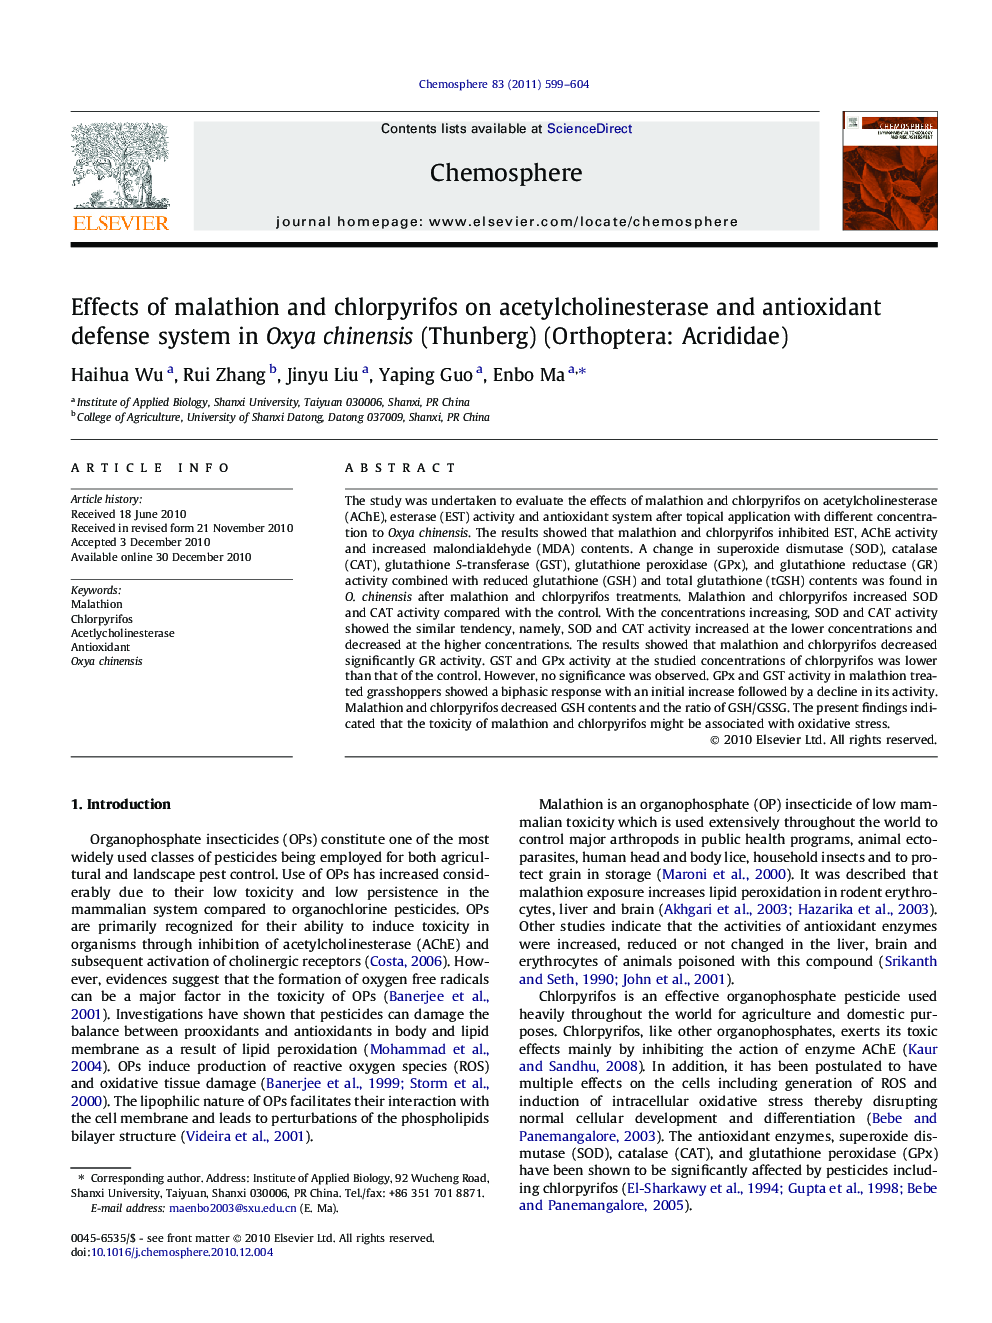 Effects of malathion and chlorpyrifos on acetylcholinesterase and antioxidant defense system in Oxya chinensis (Thunberg) (Orthoptera: Acrididae)